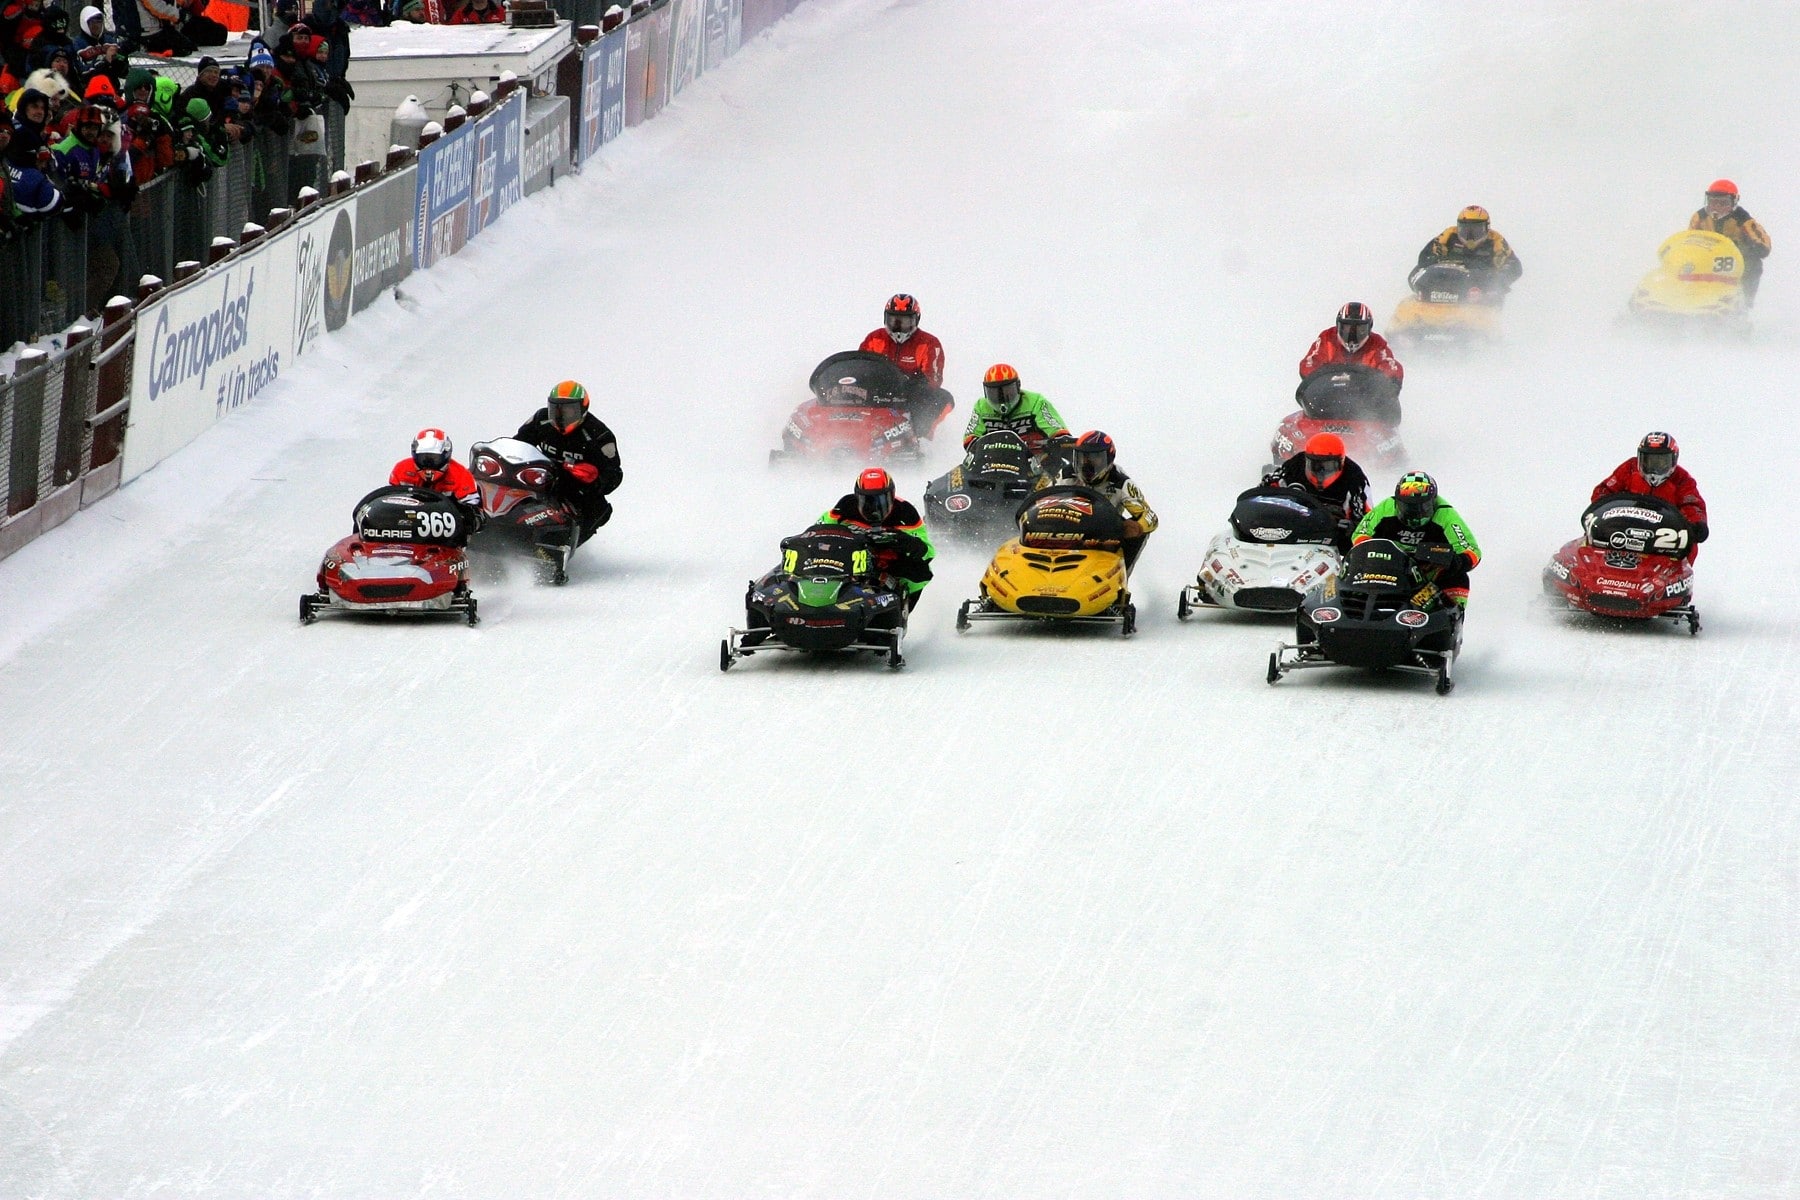 A group of people on snowmobiles cruising through Eagle River.